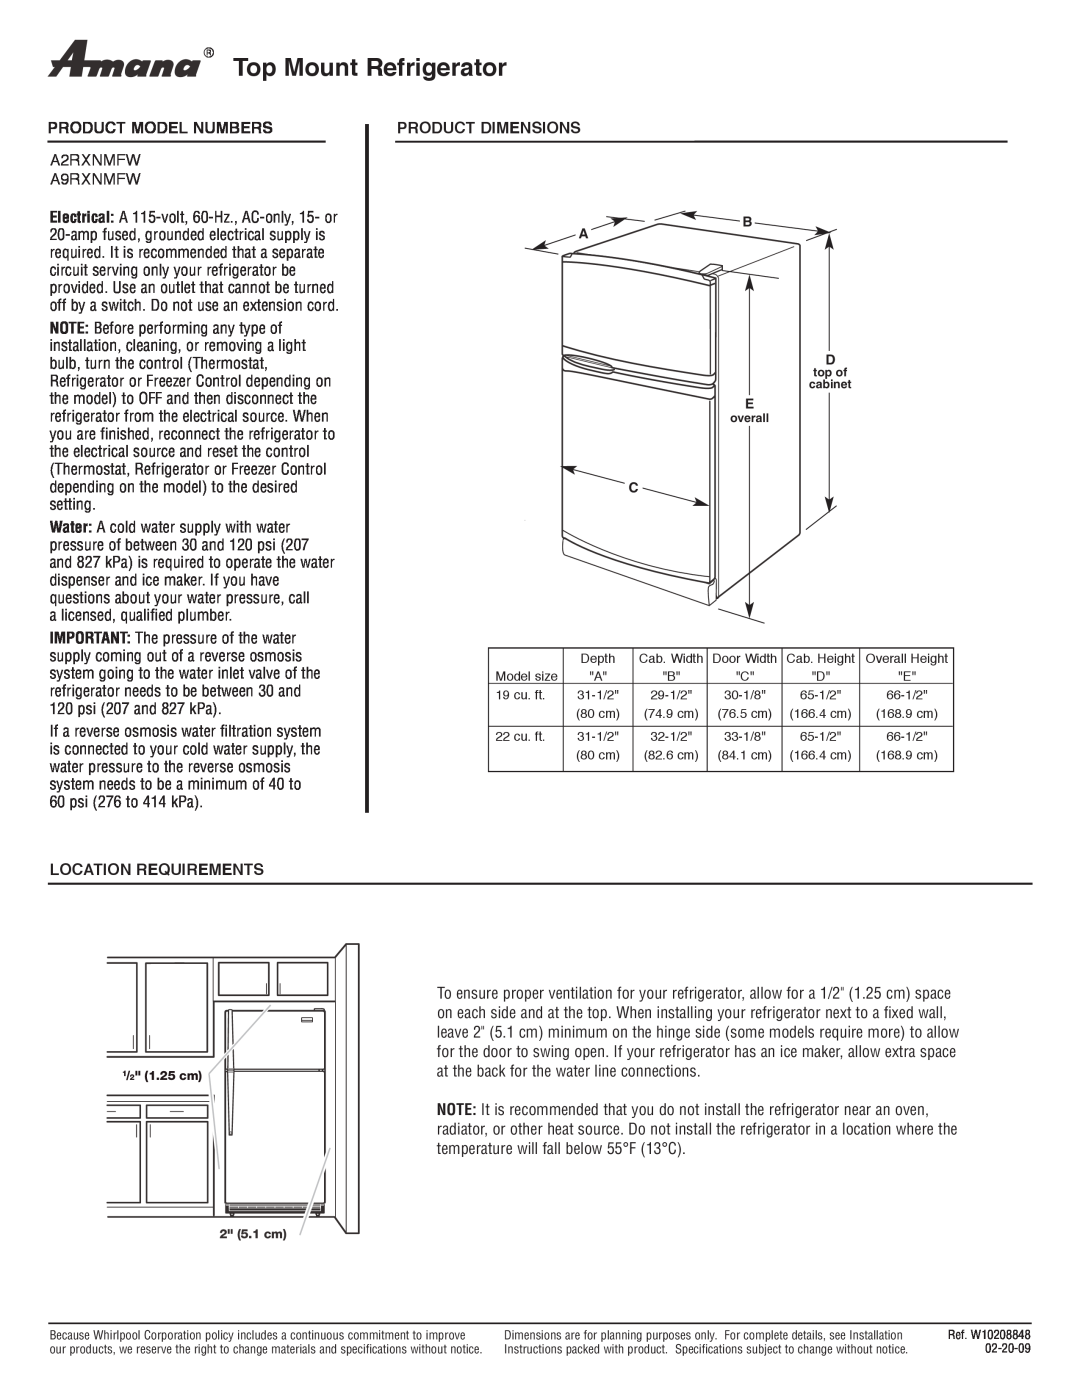 Amana A9RXNMFW dimensions Top Mount Refrigerator, Product Model Numbers, Product Dimensions, Location Requirements 